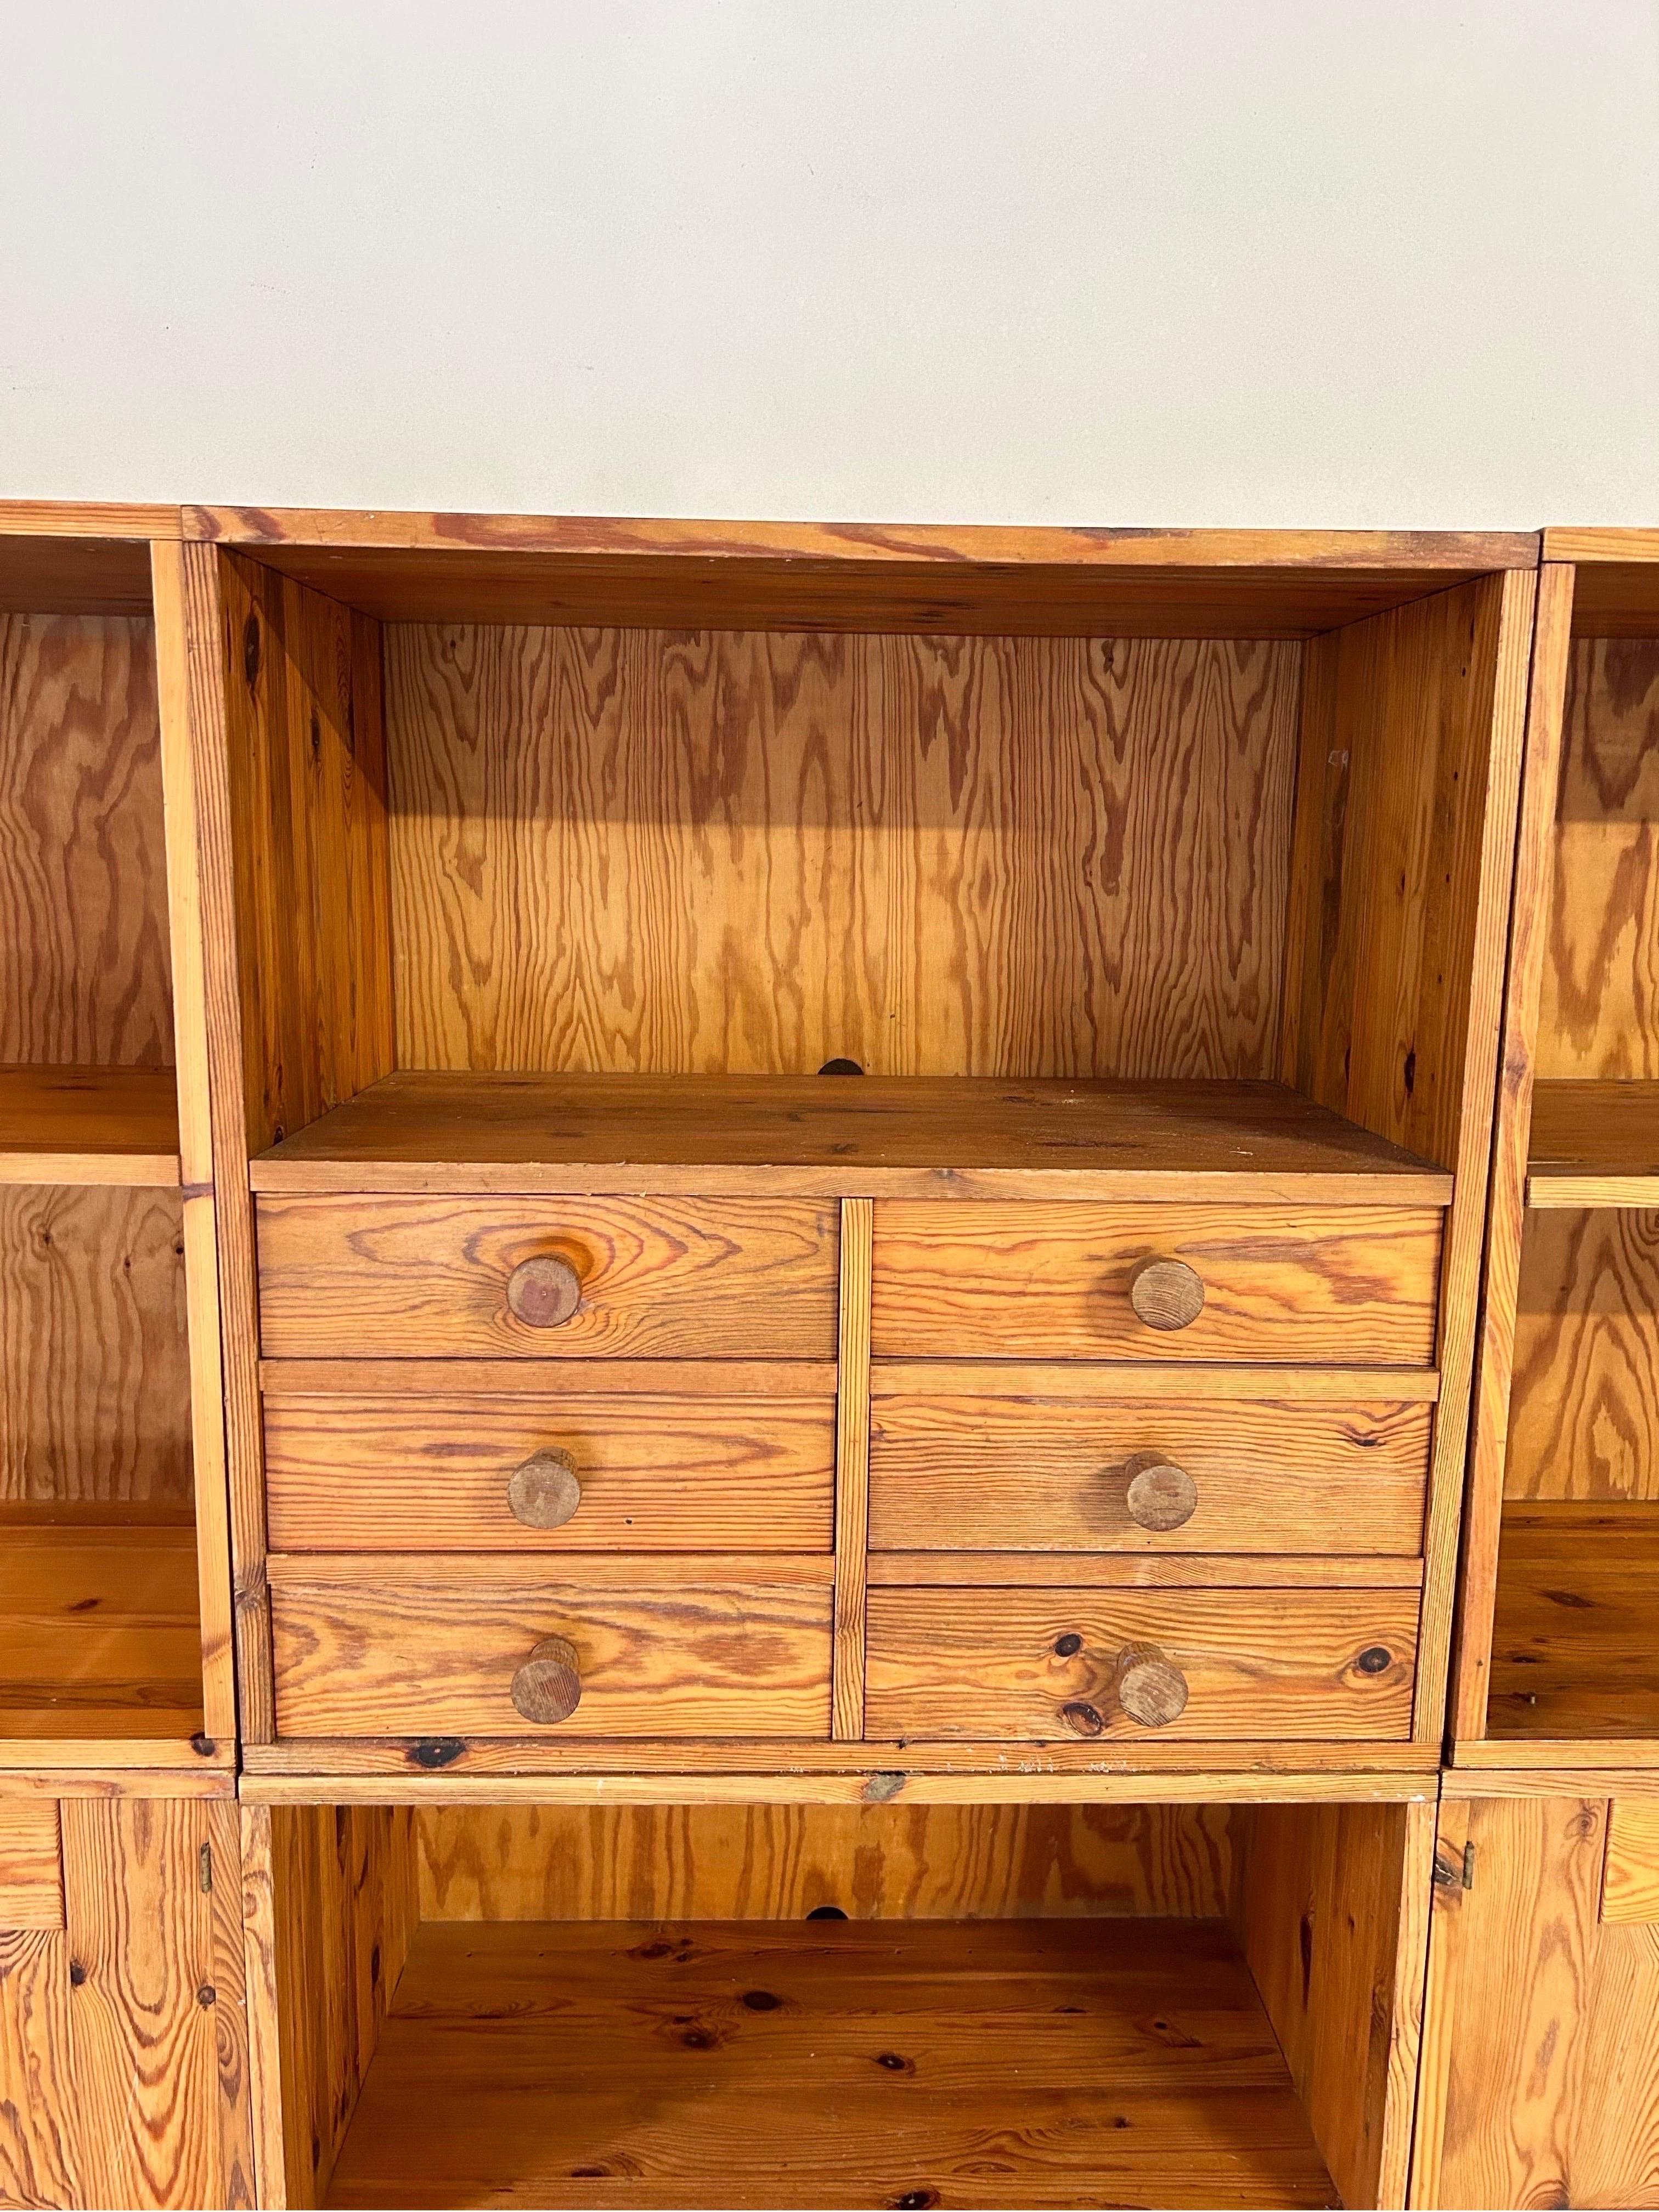 Set of six cabinets by Swedish manufacturer Luxus, crafted and designed in the 1970s. Constructed from solid pine, these cabinets boast a timeless aesthetic, further accentuated by tapered joints adorning the tops. The meticulous craftsmanship and